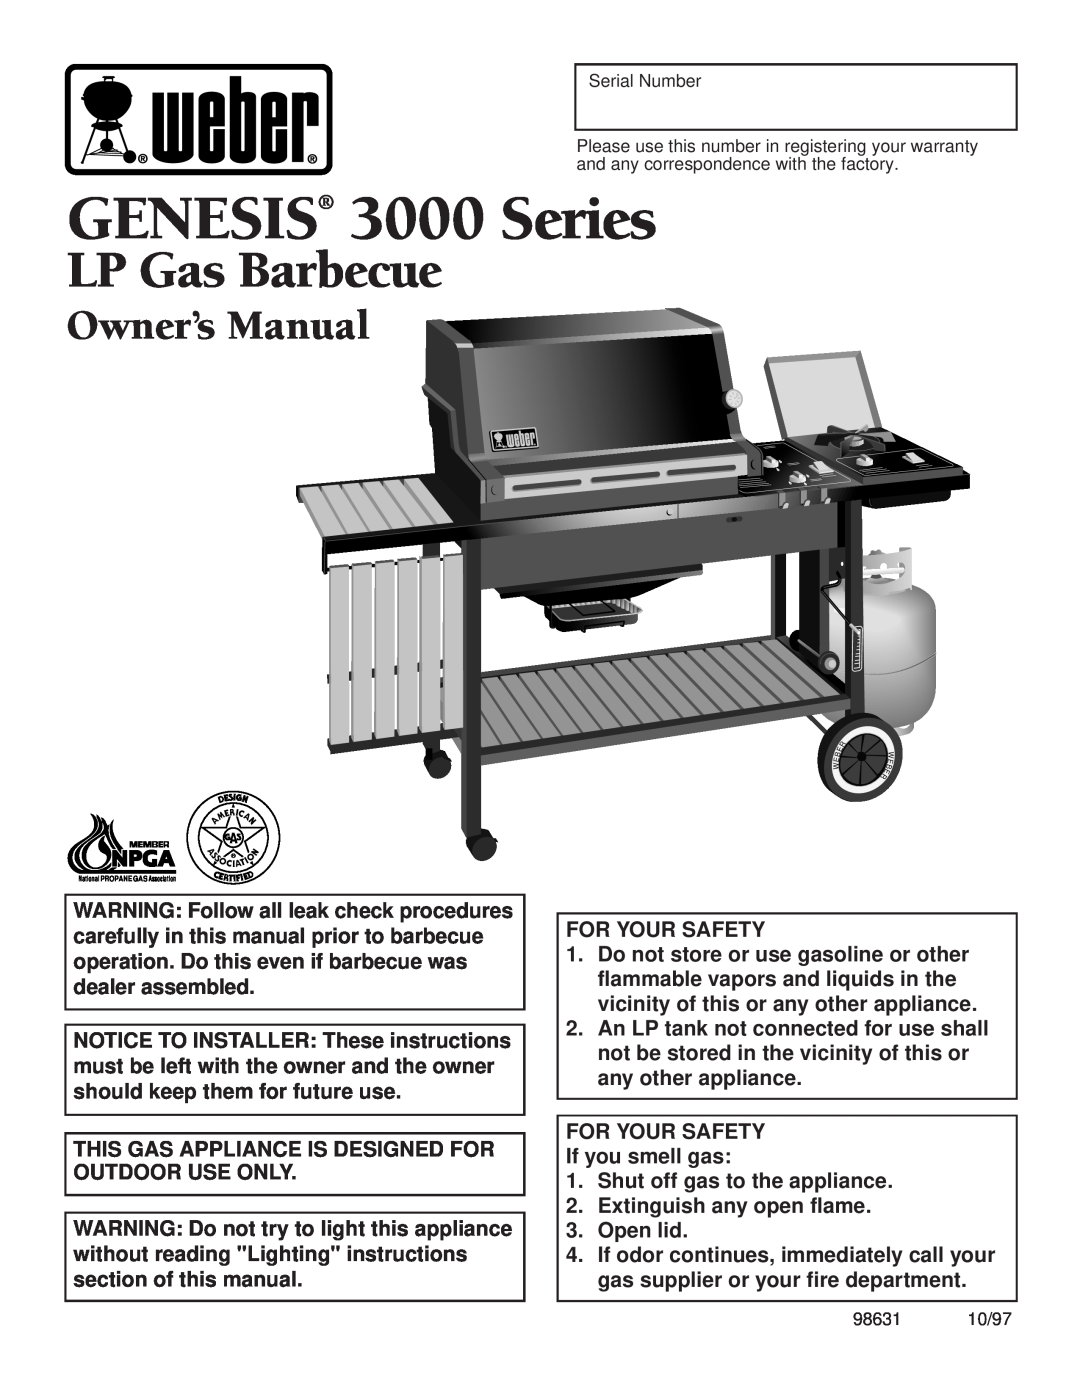 Weber owner manual LP Gas Barbecue, GENESIS 3000 Series, Owner’s Manual, For Your Safety 